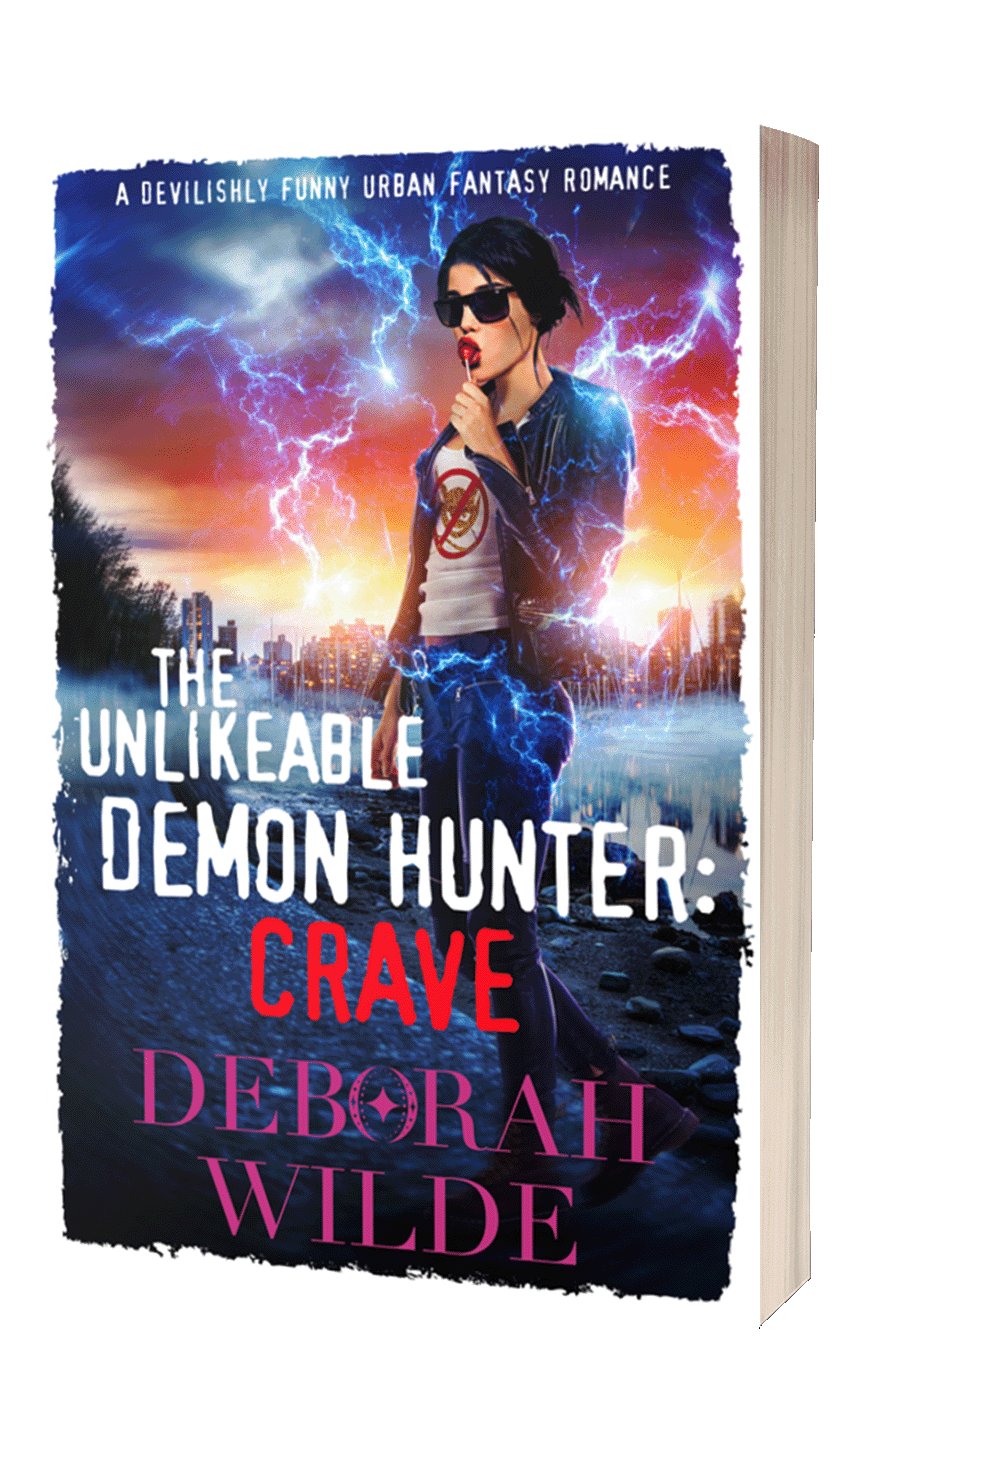 The Unlikeable Demon Hunter:Crave, a funny, sexy, urban fantasy from Deborah Wilde.